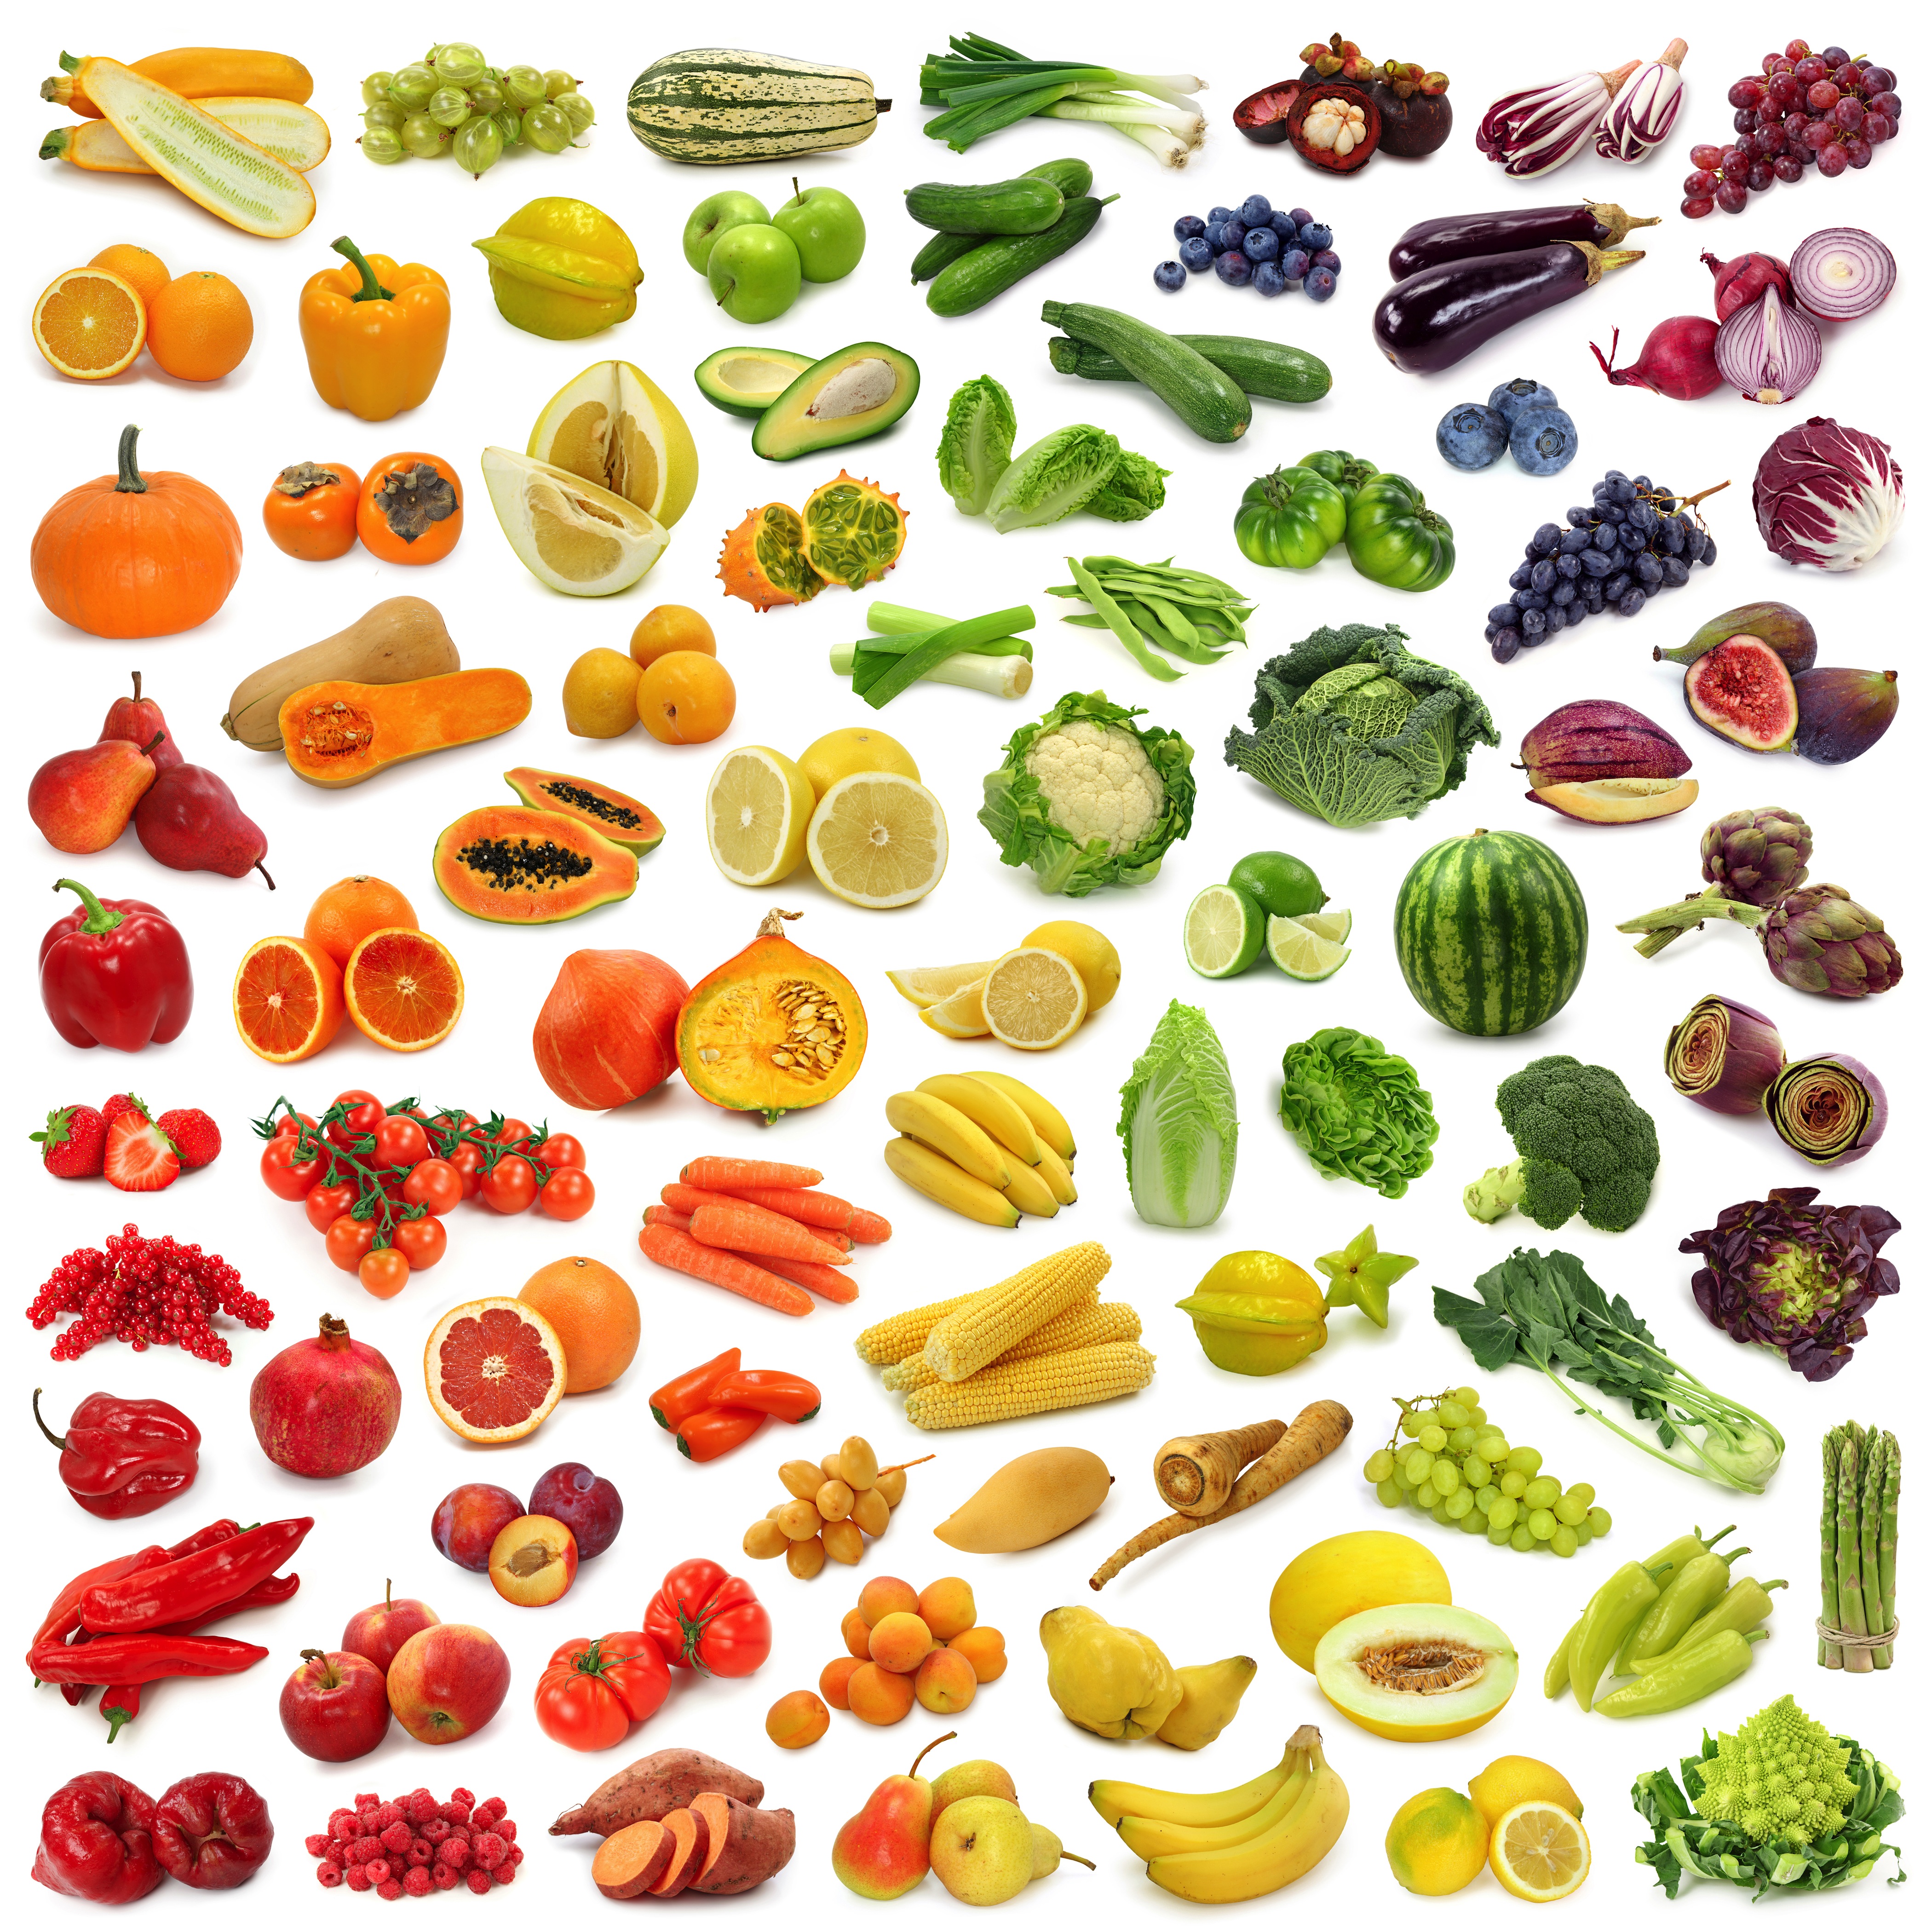 An Outline Of The Veggies And Fruits